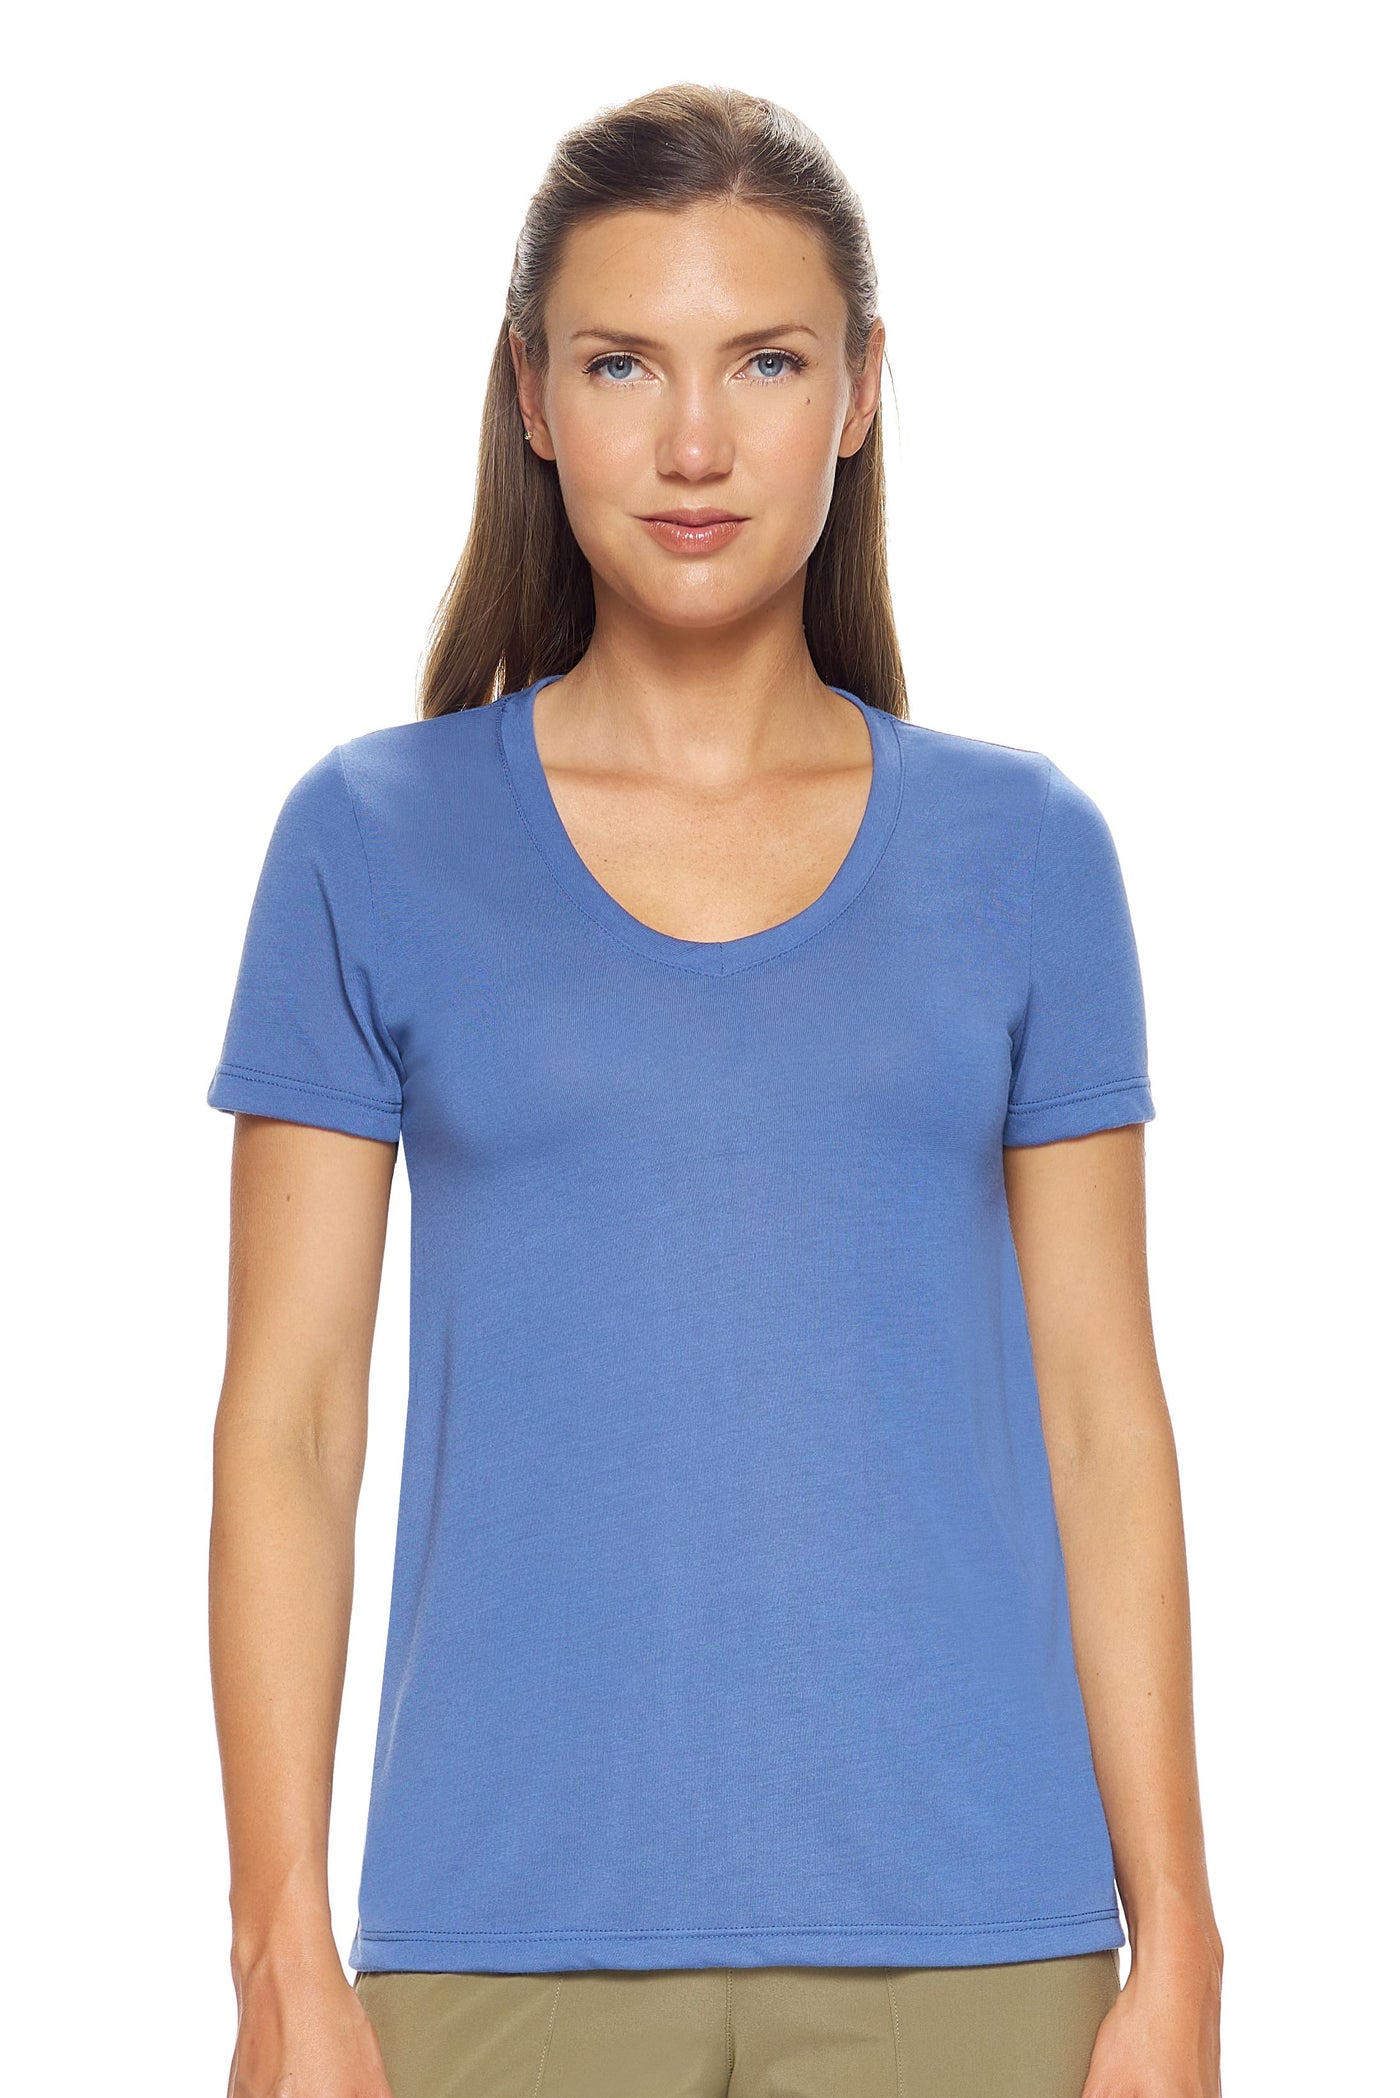 Expert Brand Retail Soft Eco-Friendly Women's Sportswear Women's Scoop Neck Shirt Made in USA stone blue#color_stone-blue